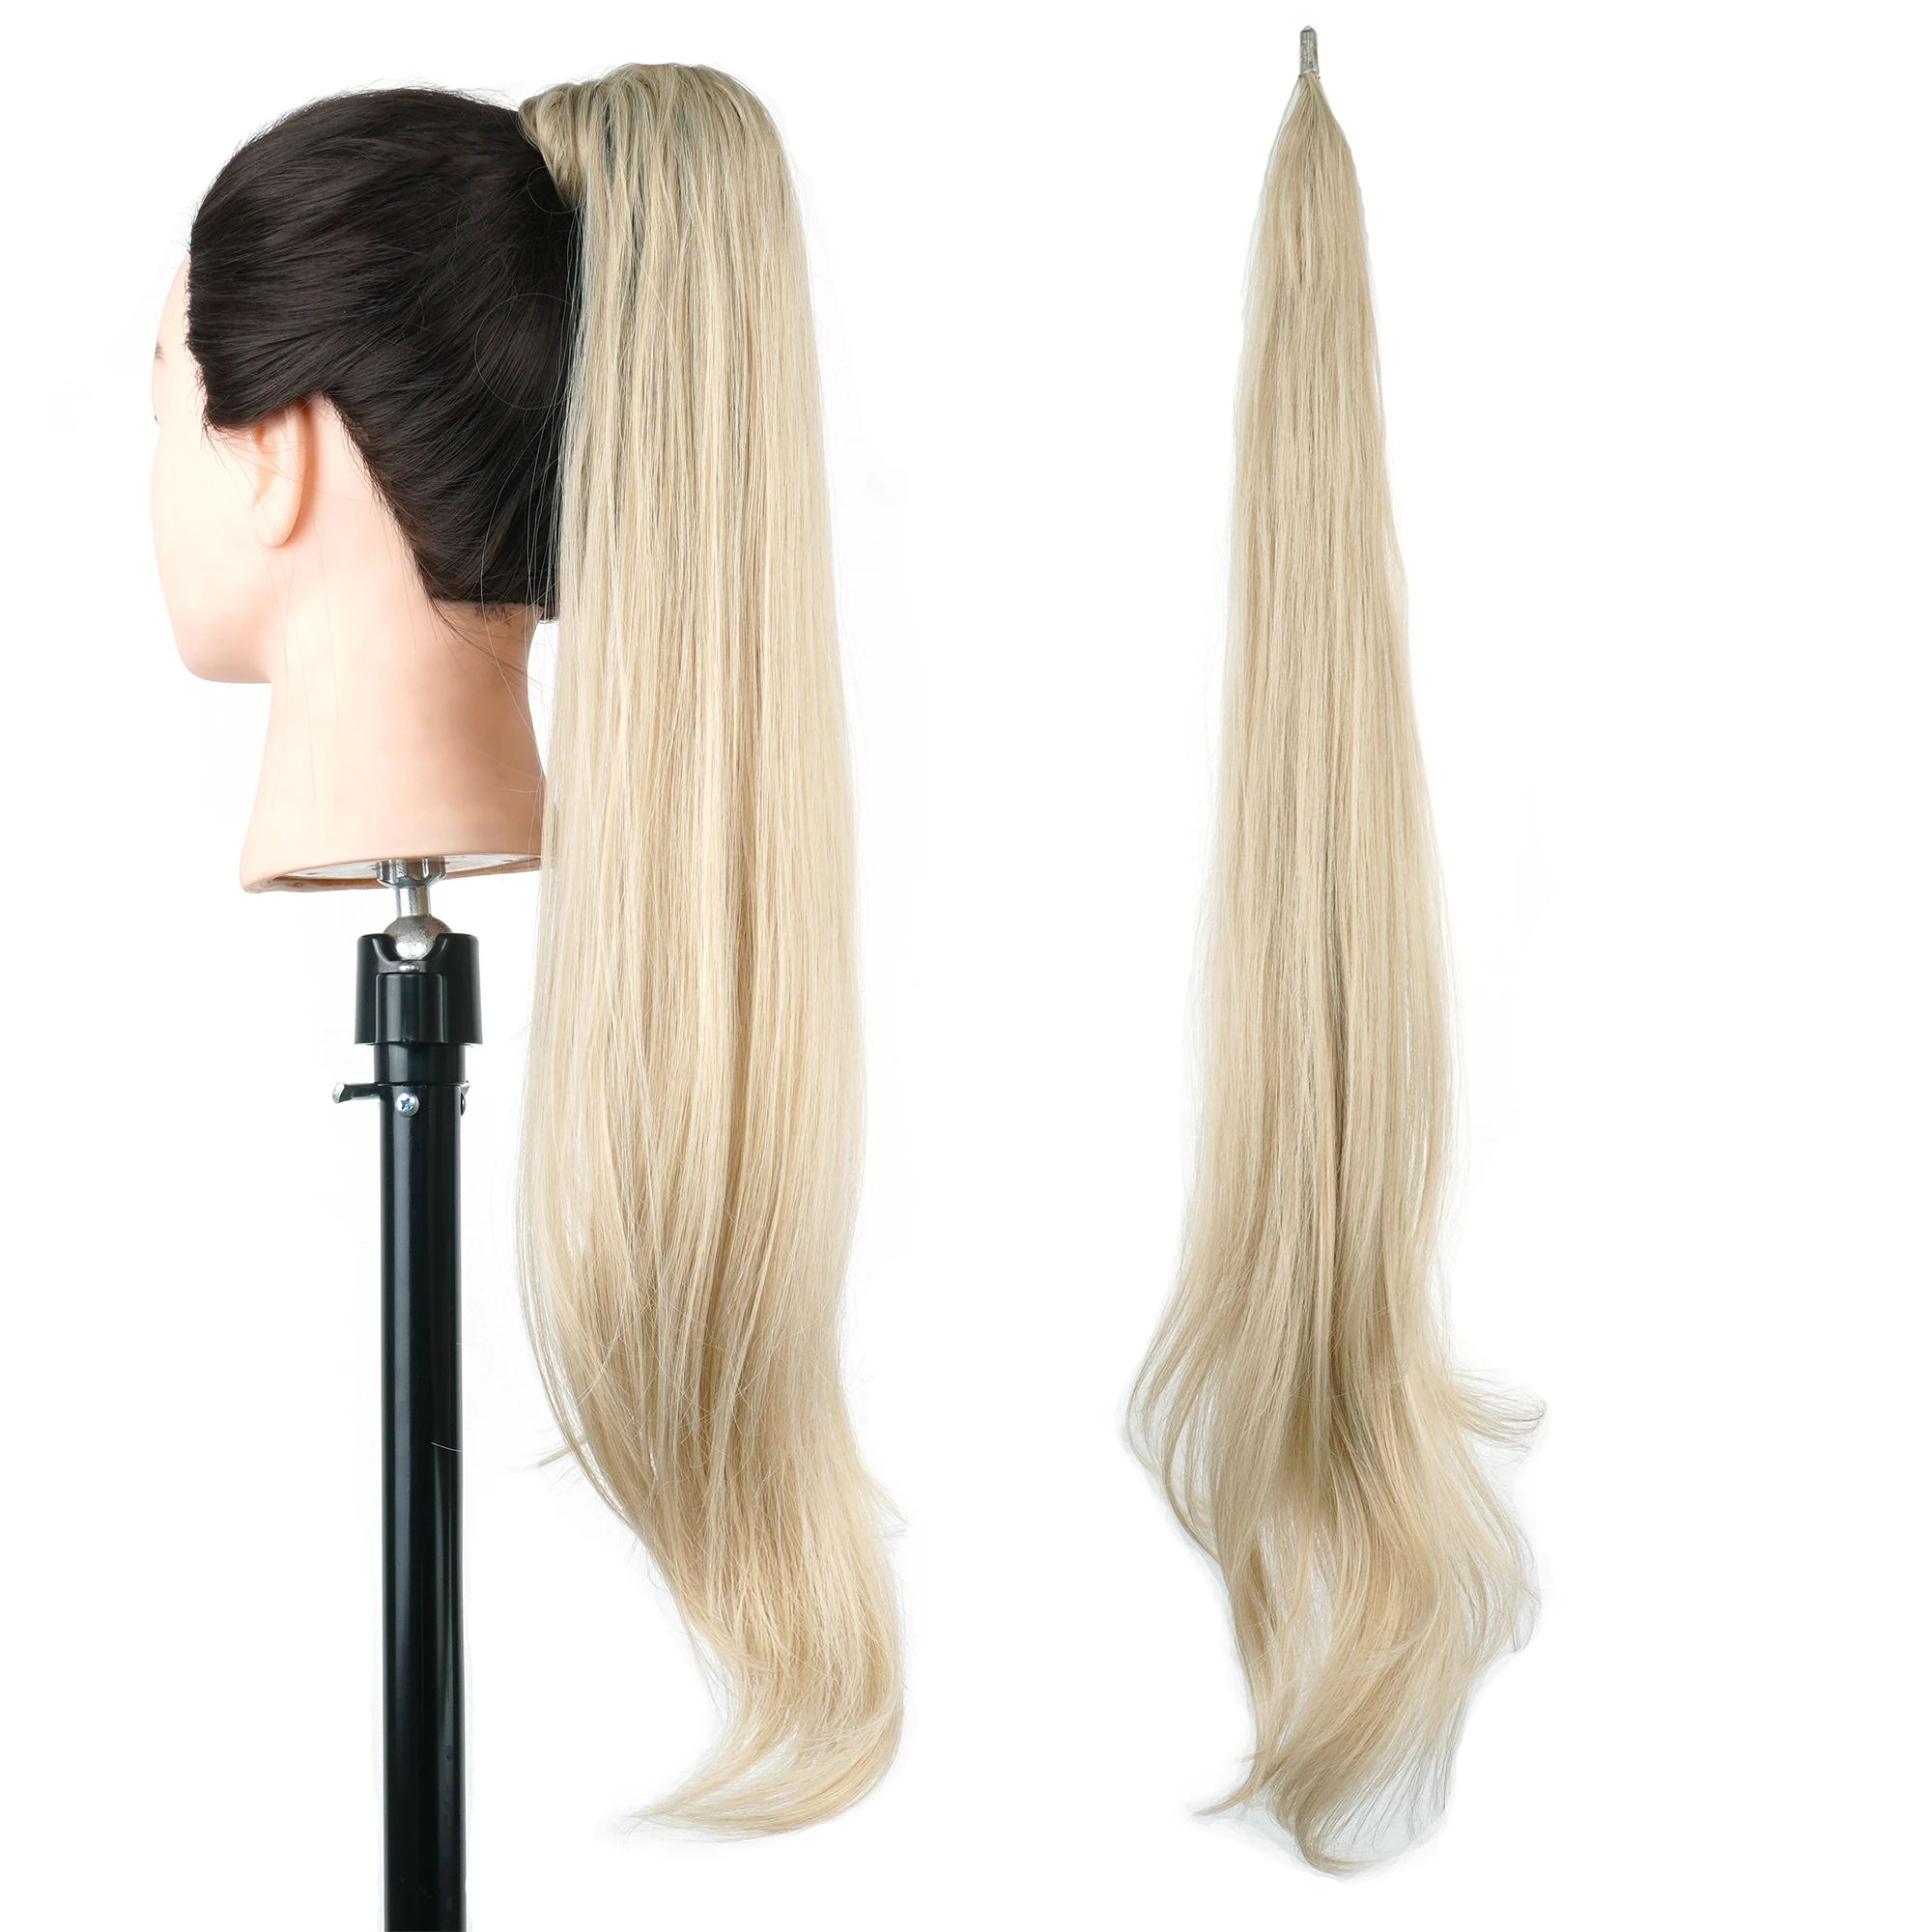 Soowee Long Synthetic Hair Extension Blonde Wrap Pony Tail Flexible Hair Ponytails Hairpieces